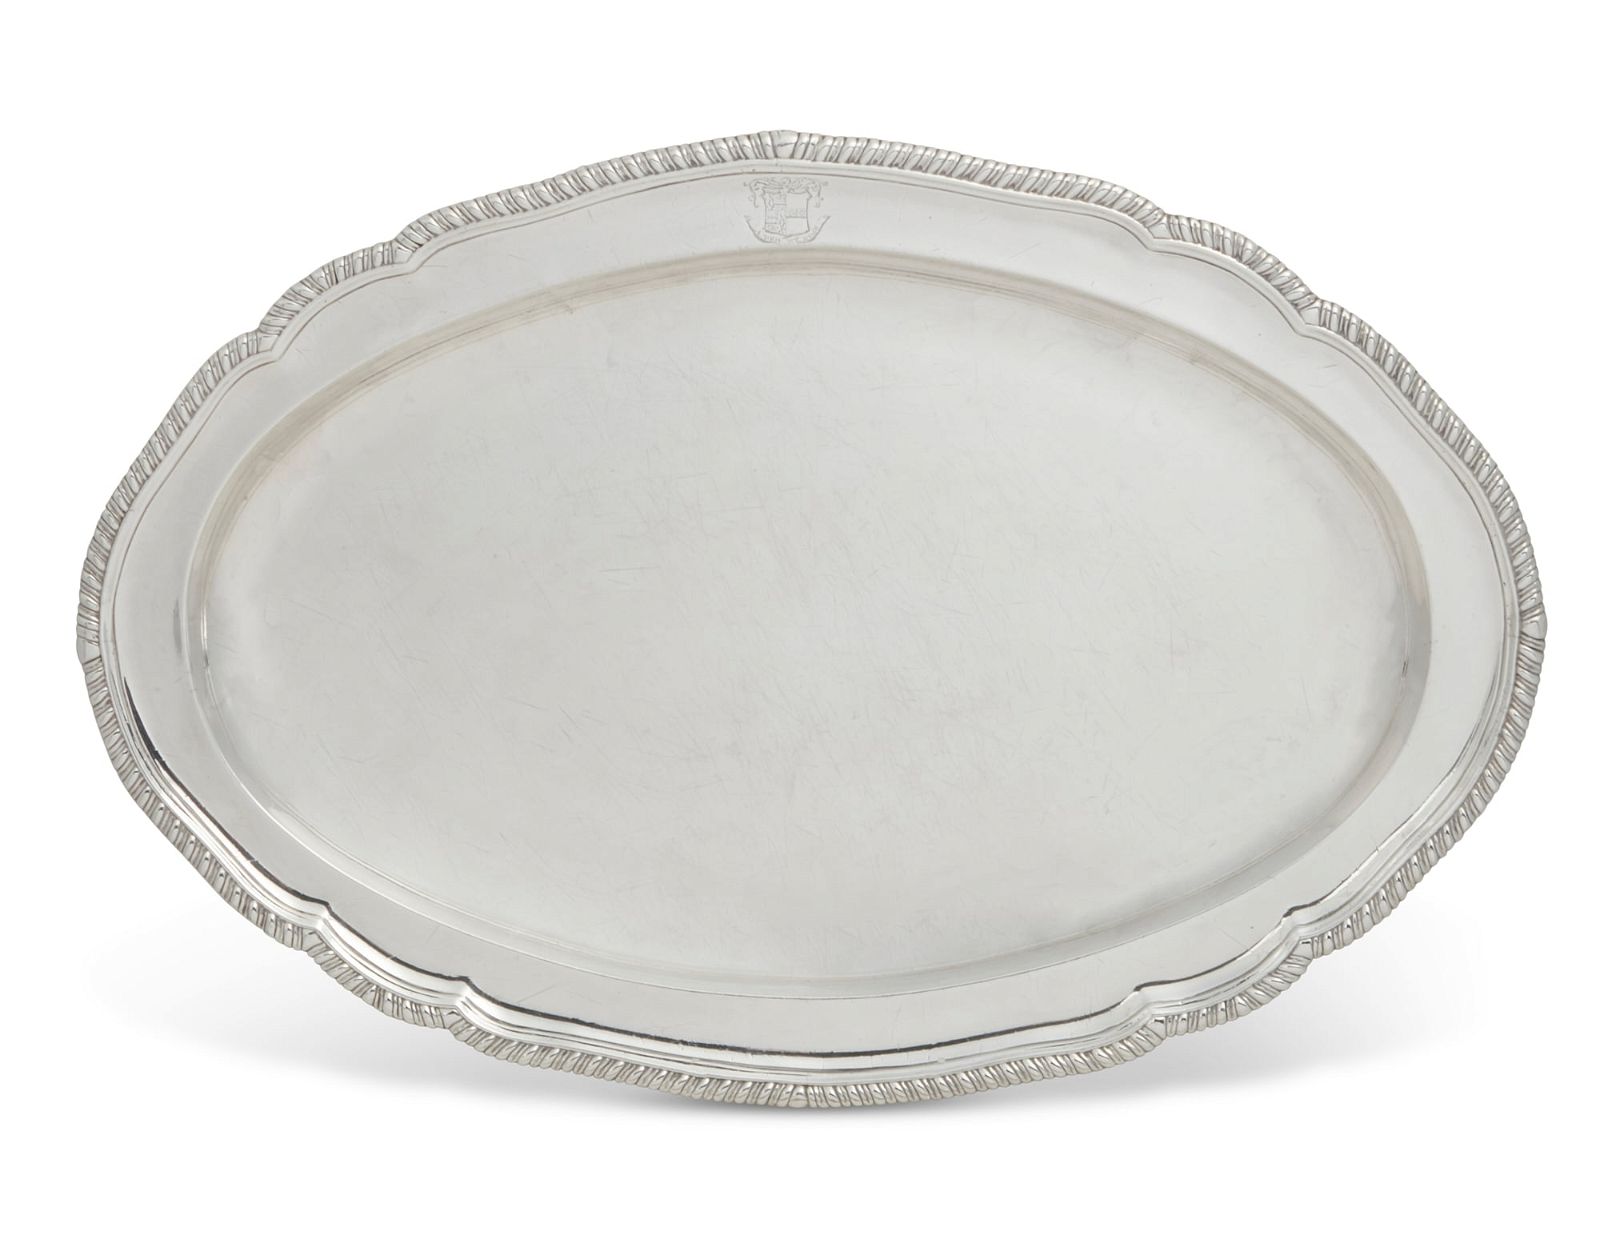 A LARGE GEORGE III STERLING SILVER